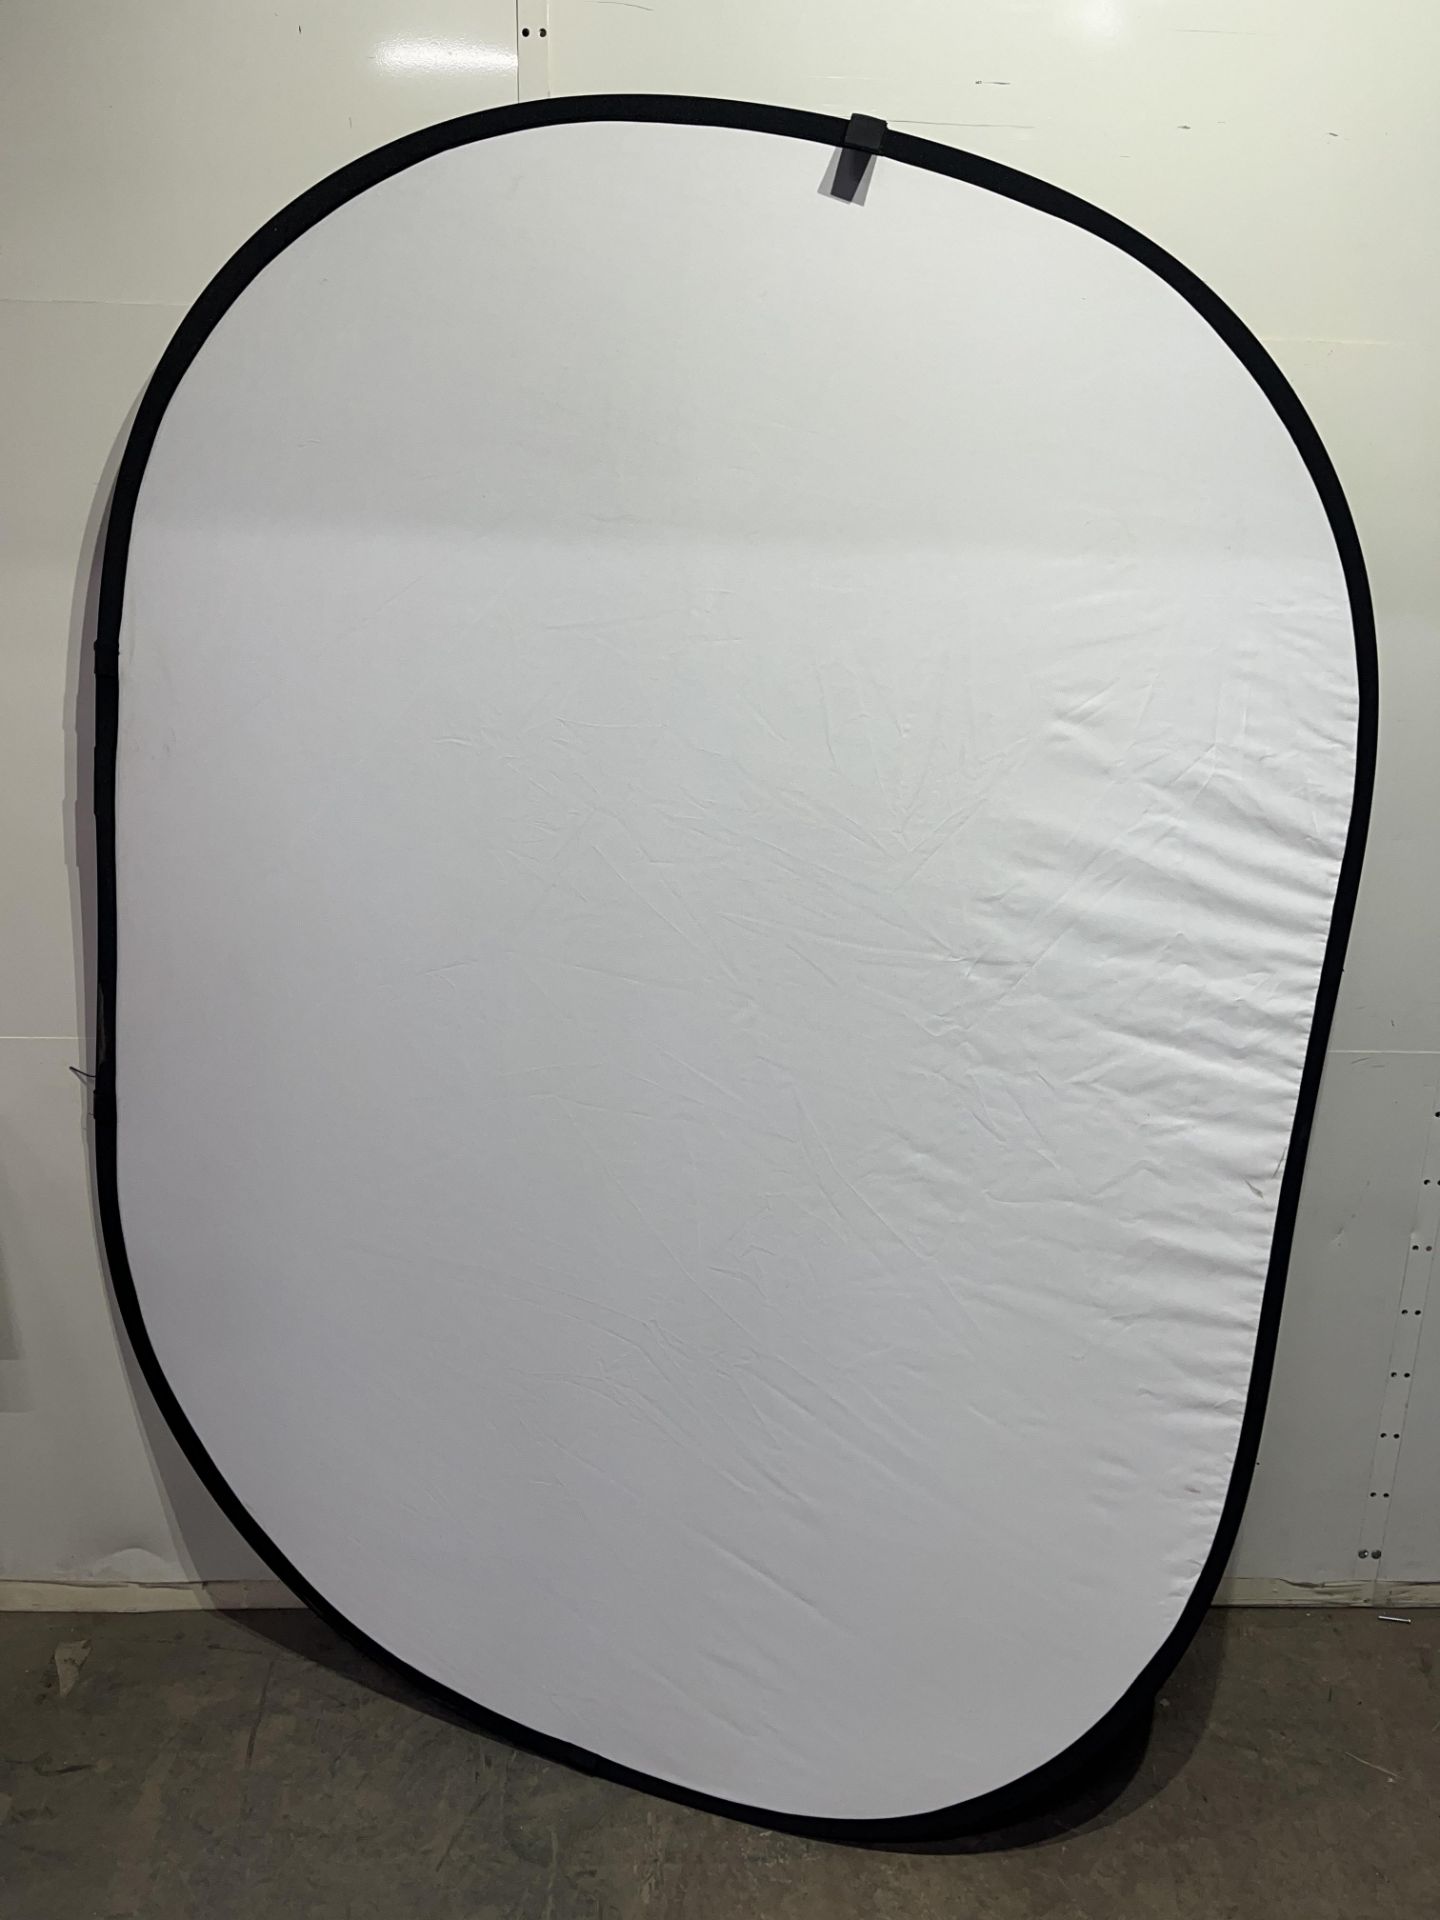 Foldable Photography Backdrop with Storage Bag